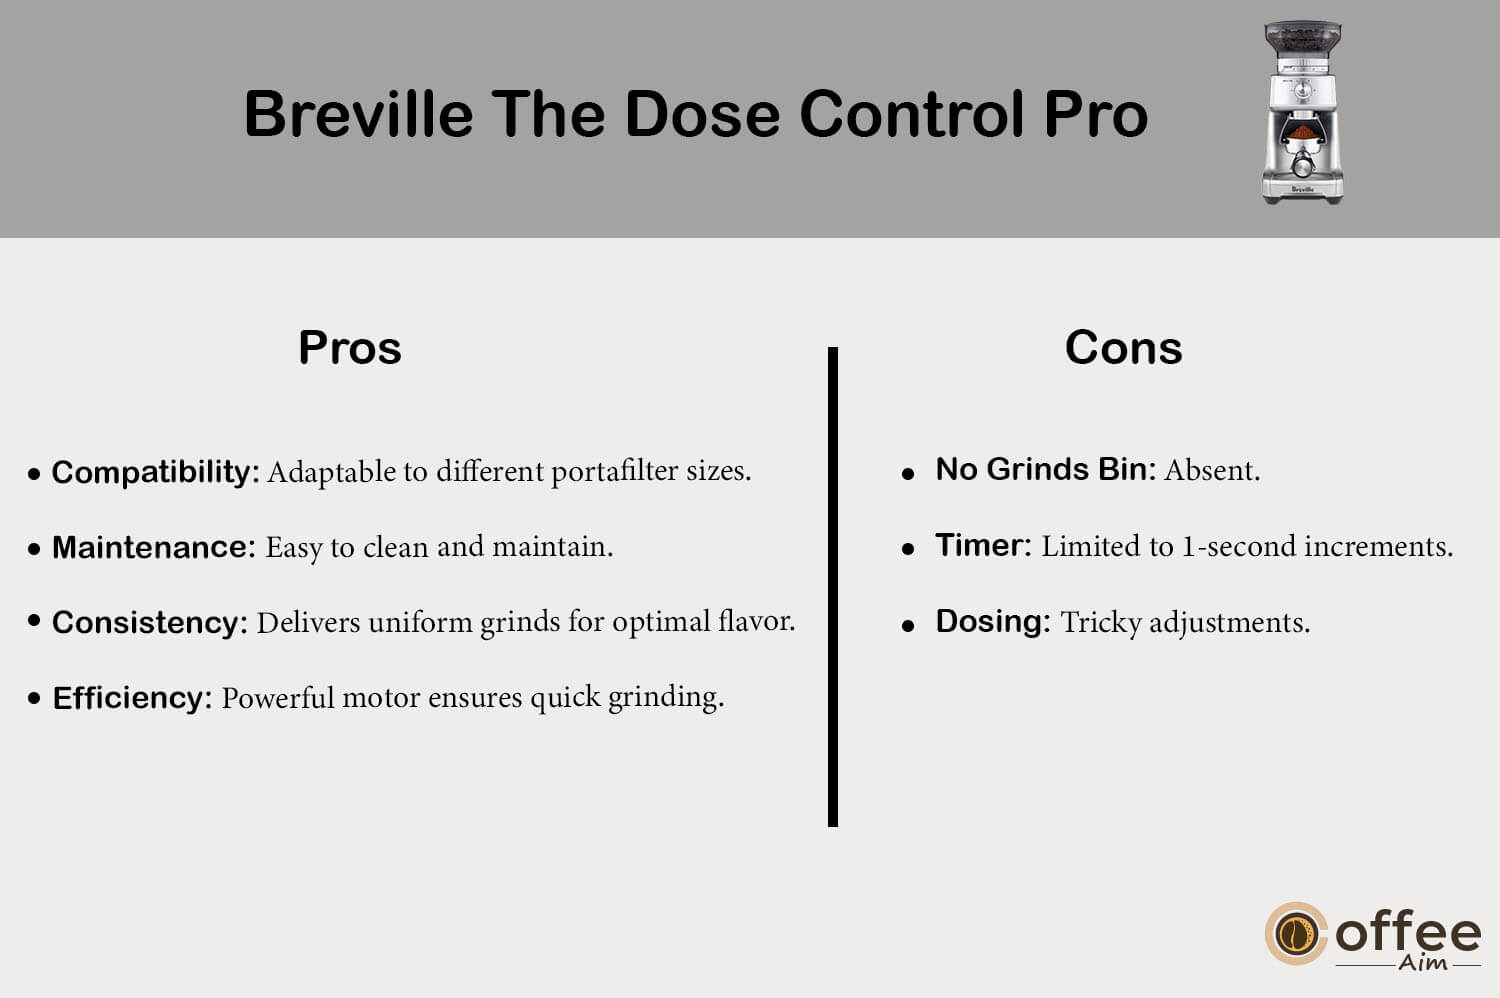 This visual representation depicts the advantages and disadvantages of the "Breville The Dose Control Pro" in the context of the article titled "Breville The Dose Control Pro Review."